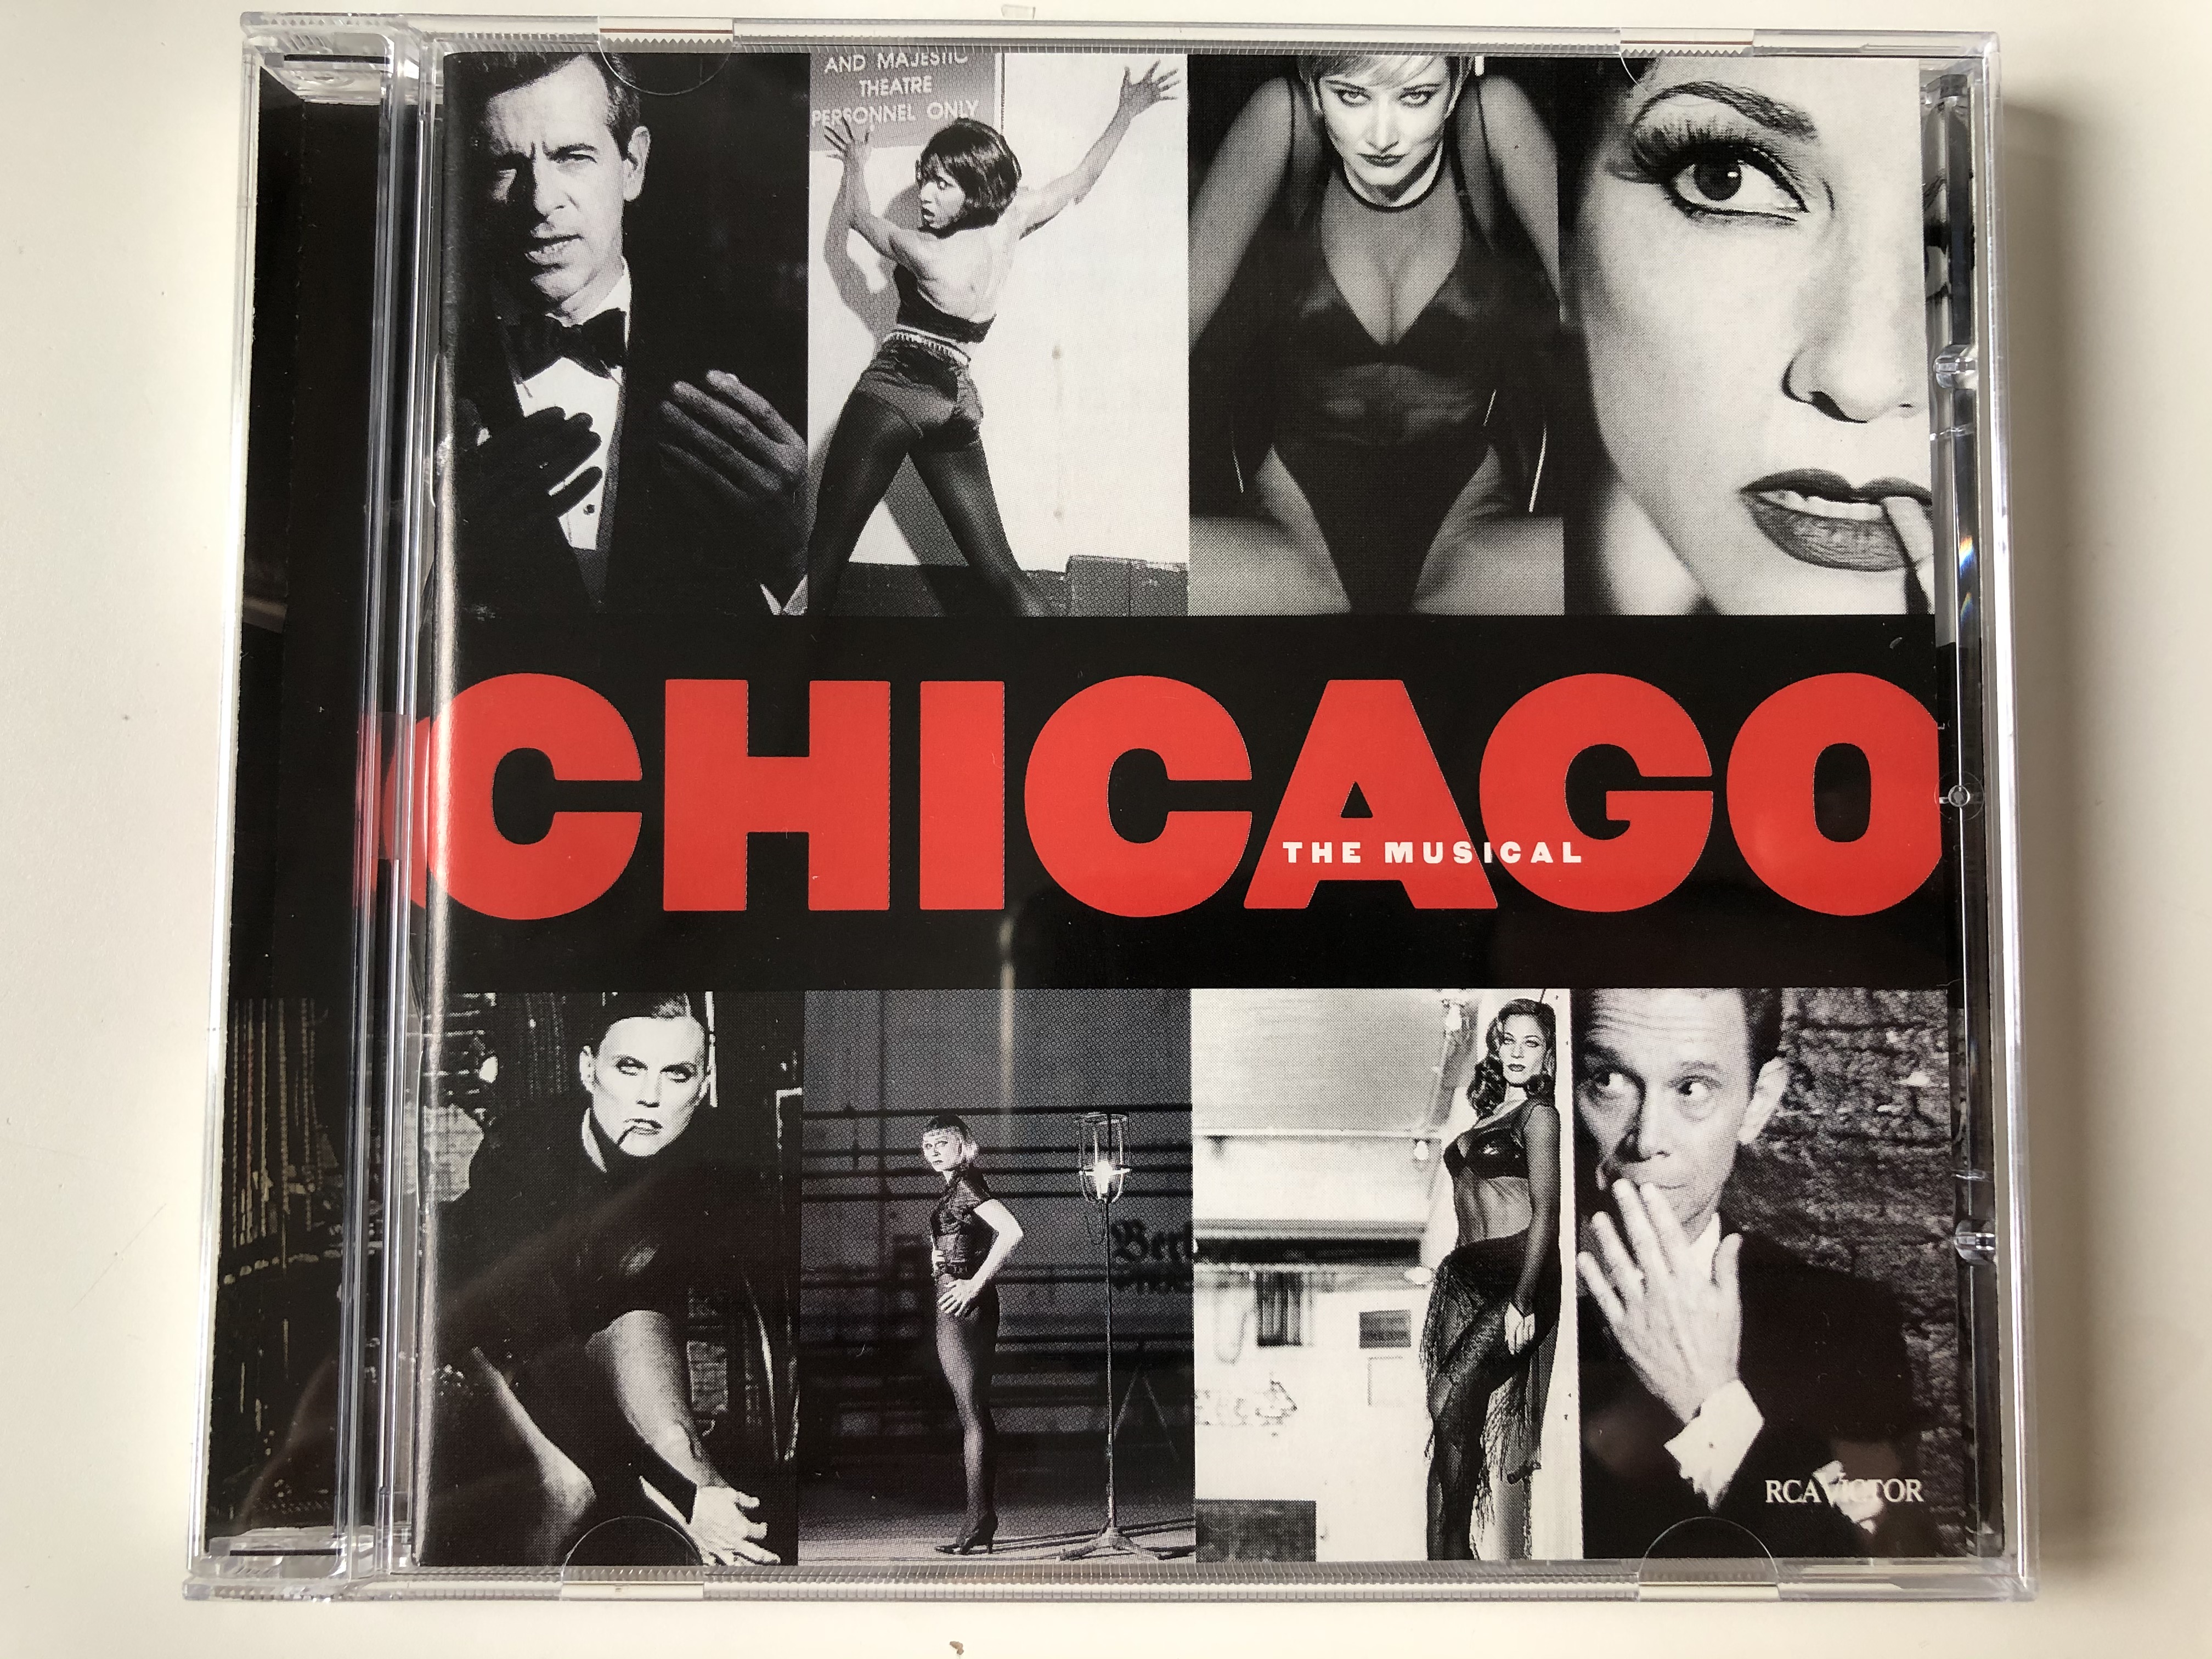 chicago-the-musical-rca-victor-audio-cd-1997-09026-68727-2-1-.jpg